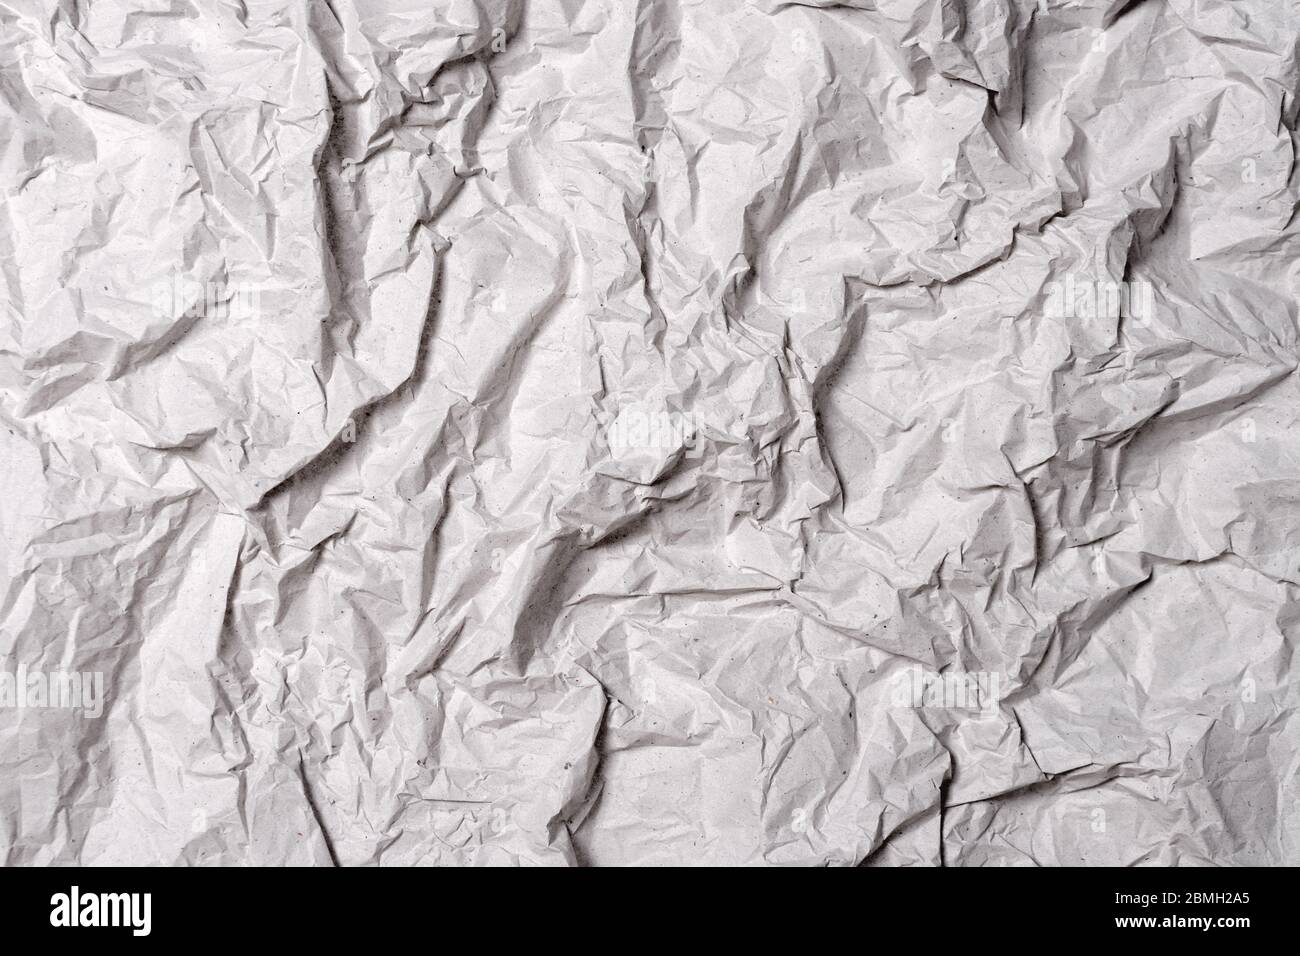 Crumpled gray paper texture. Wrinkled paper background with cracks and kinks. Stock Photo